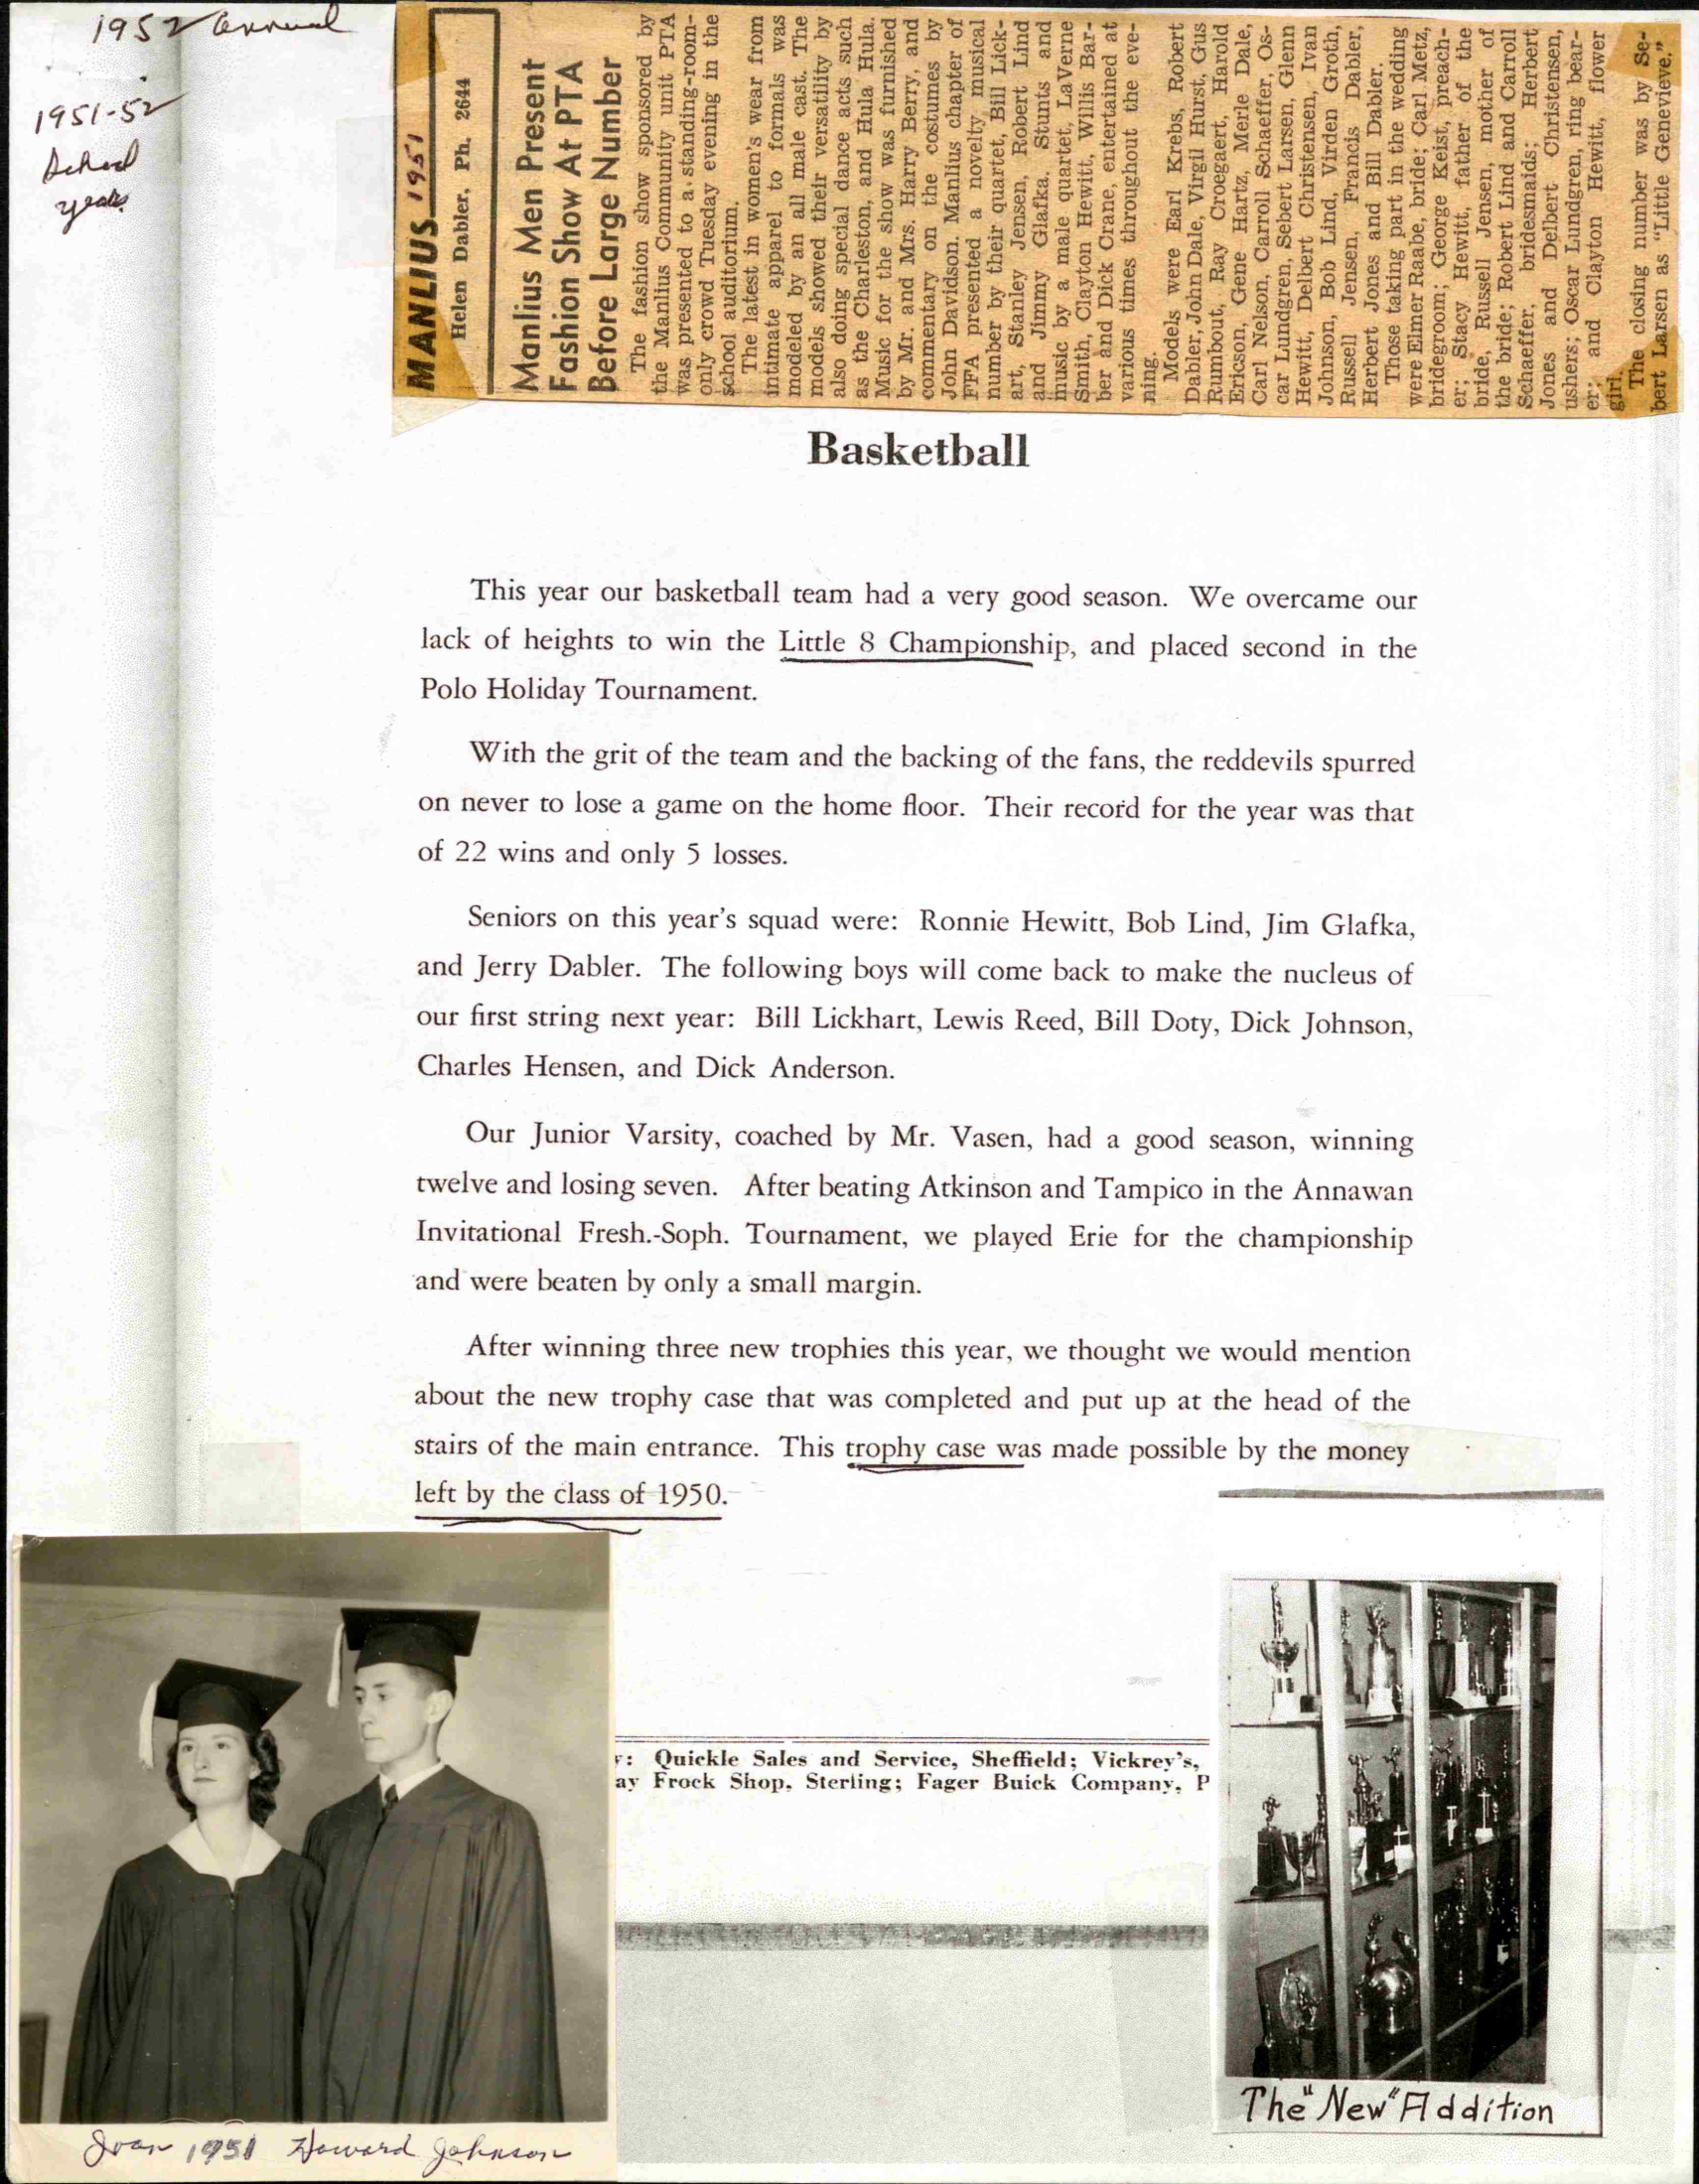 Album 16 MANLIUS HIGH SCHOOL FROM 1950-1995 Page 017